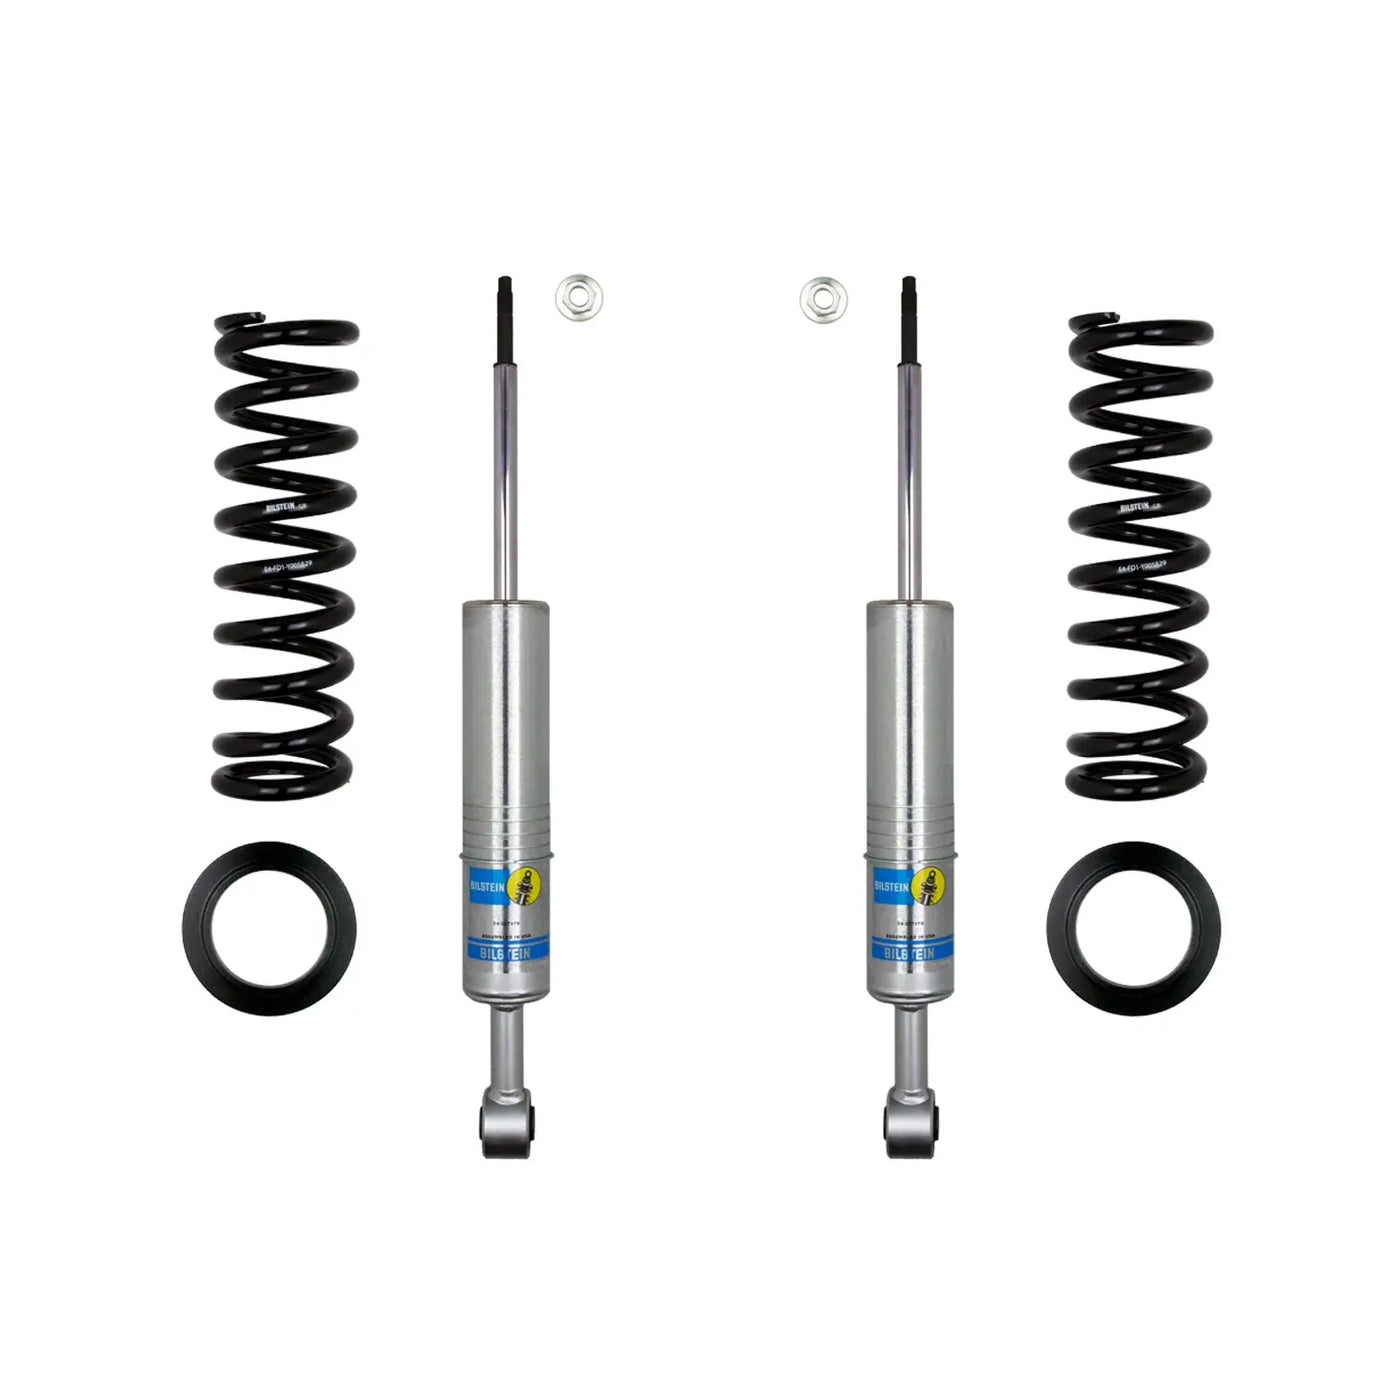 Fully Assembled Bilstein 6112 Front Suspension Kit for Toyota FJ Cruiser 2010-2014 - Wheel Every Weekend